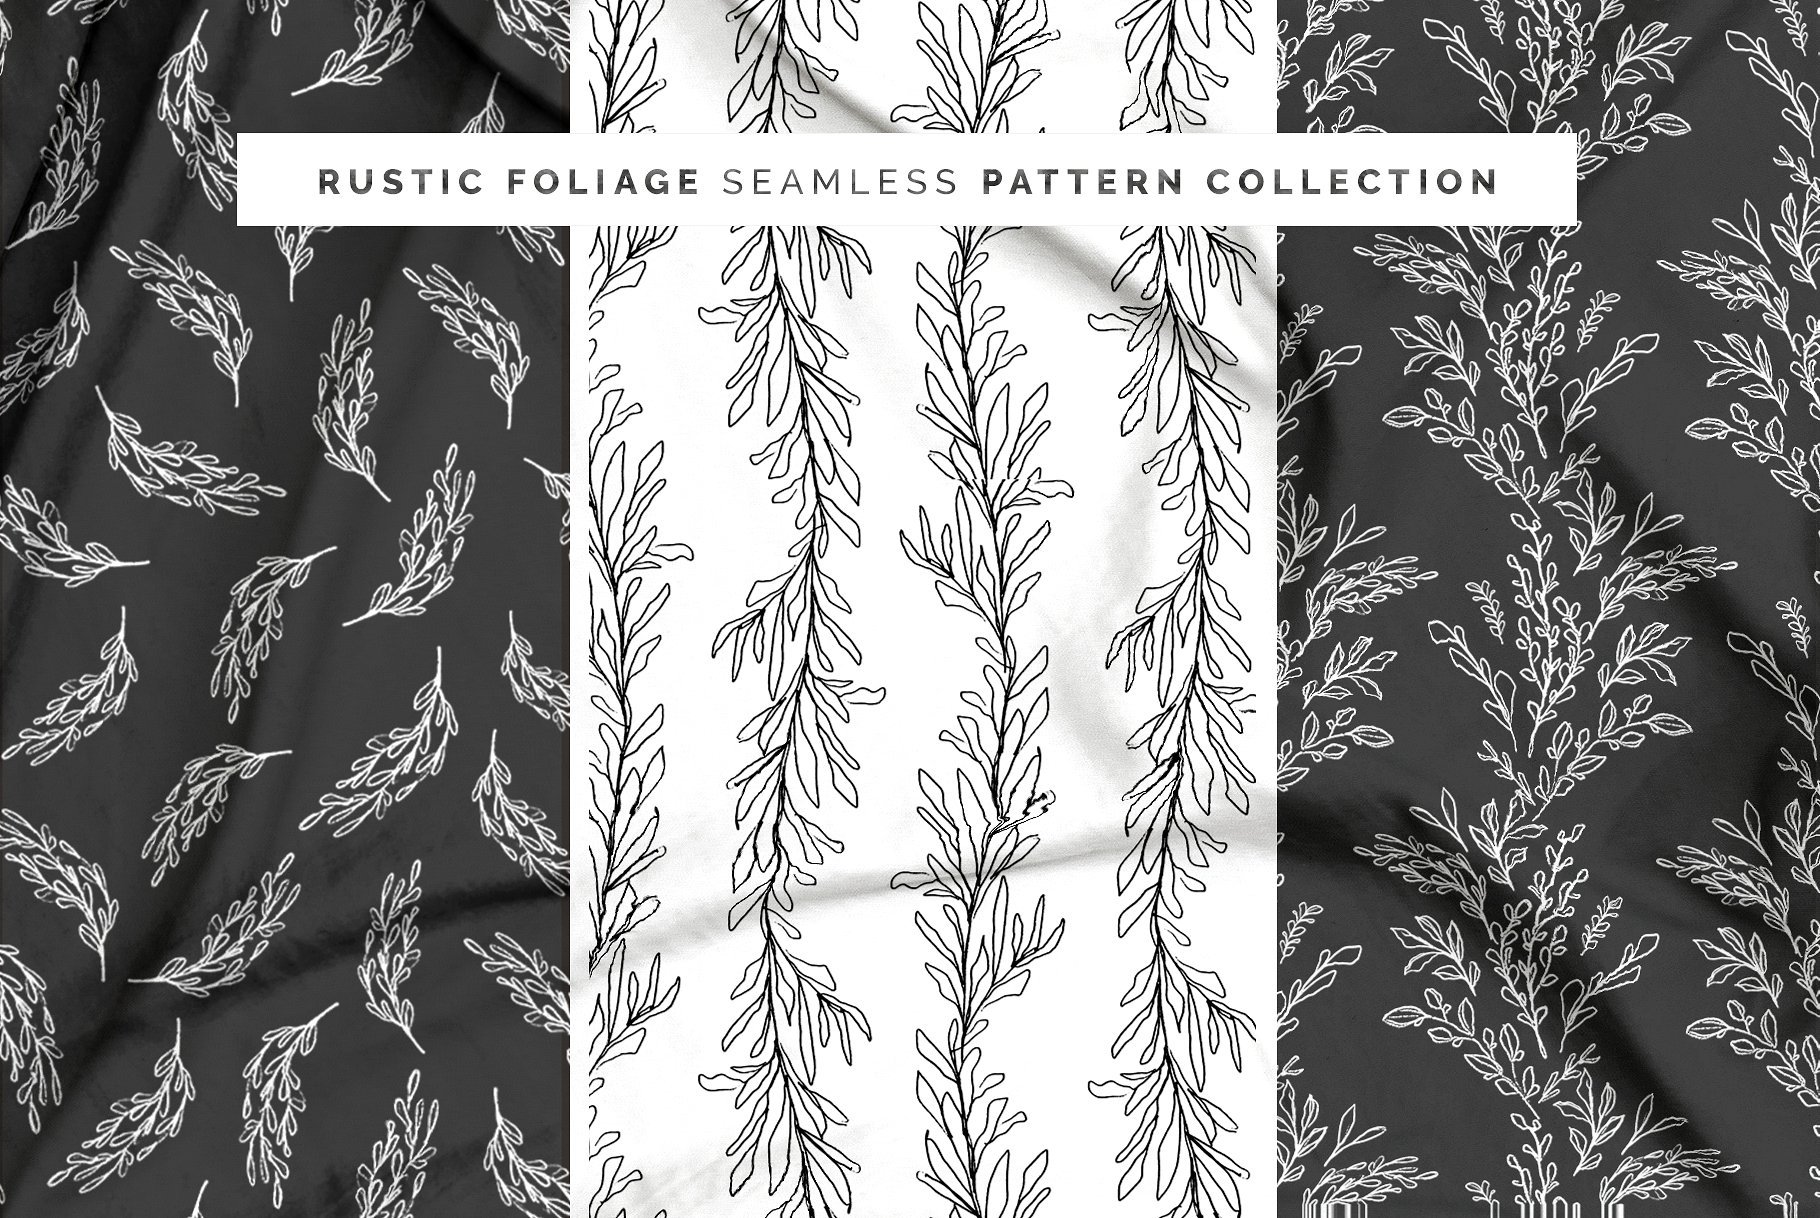 The Designer's Textures and Patterns Collection